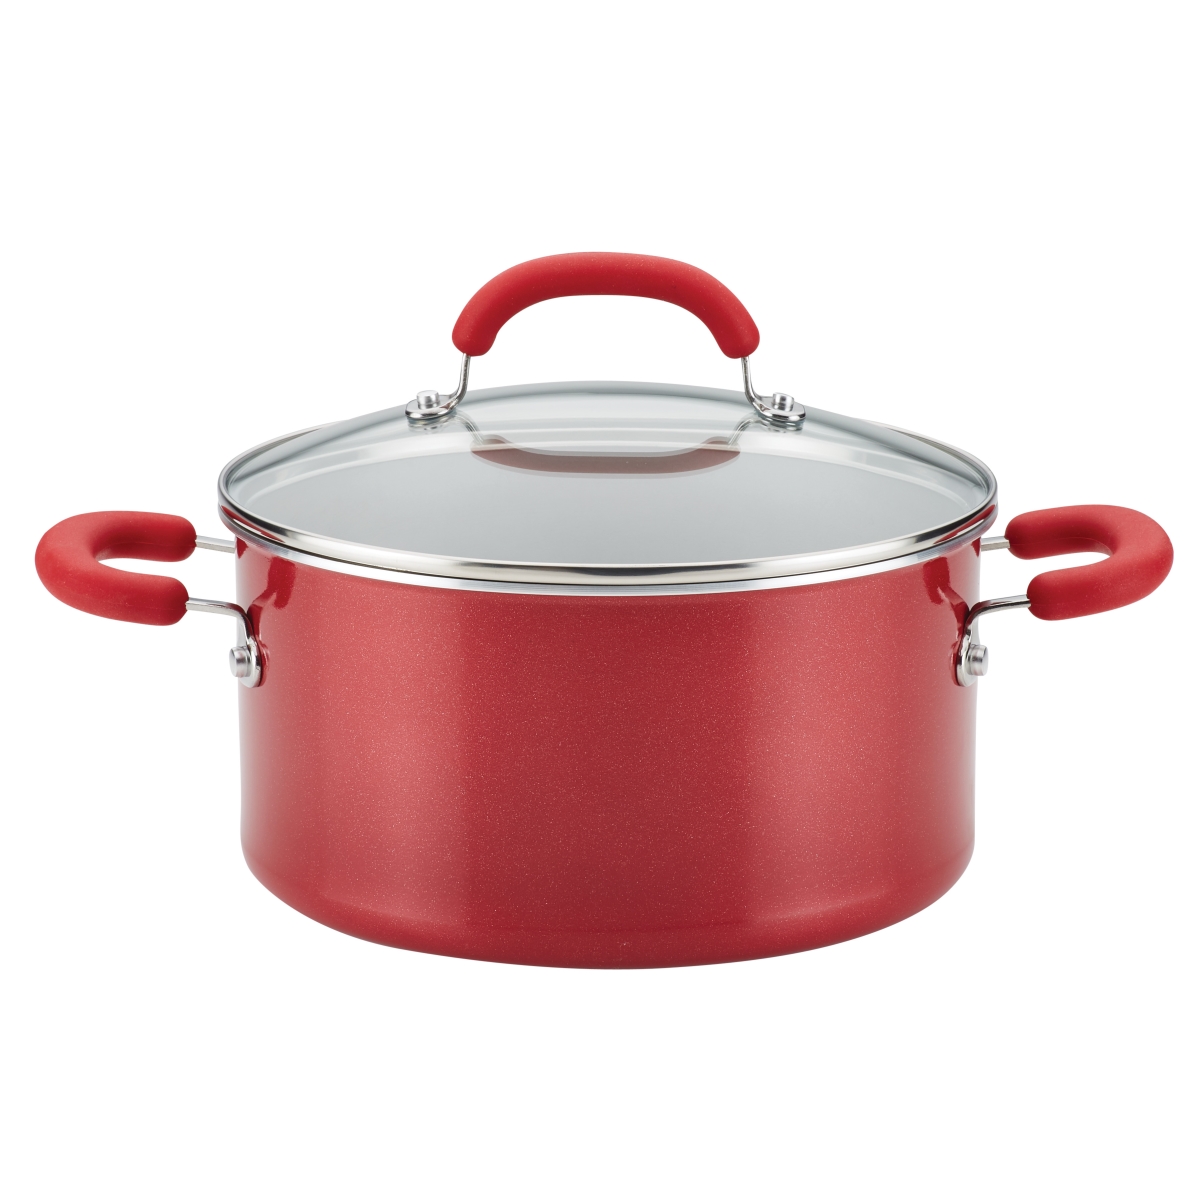 Picture of Rachael Ray 12164 6 qt. Create Delicious Aluminum Nonstick Stockpot - Red Shimmer